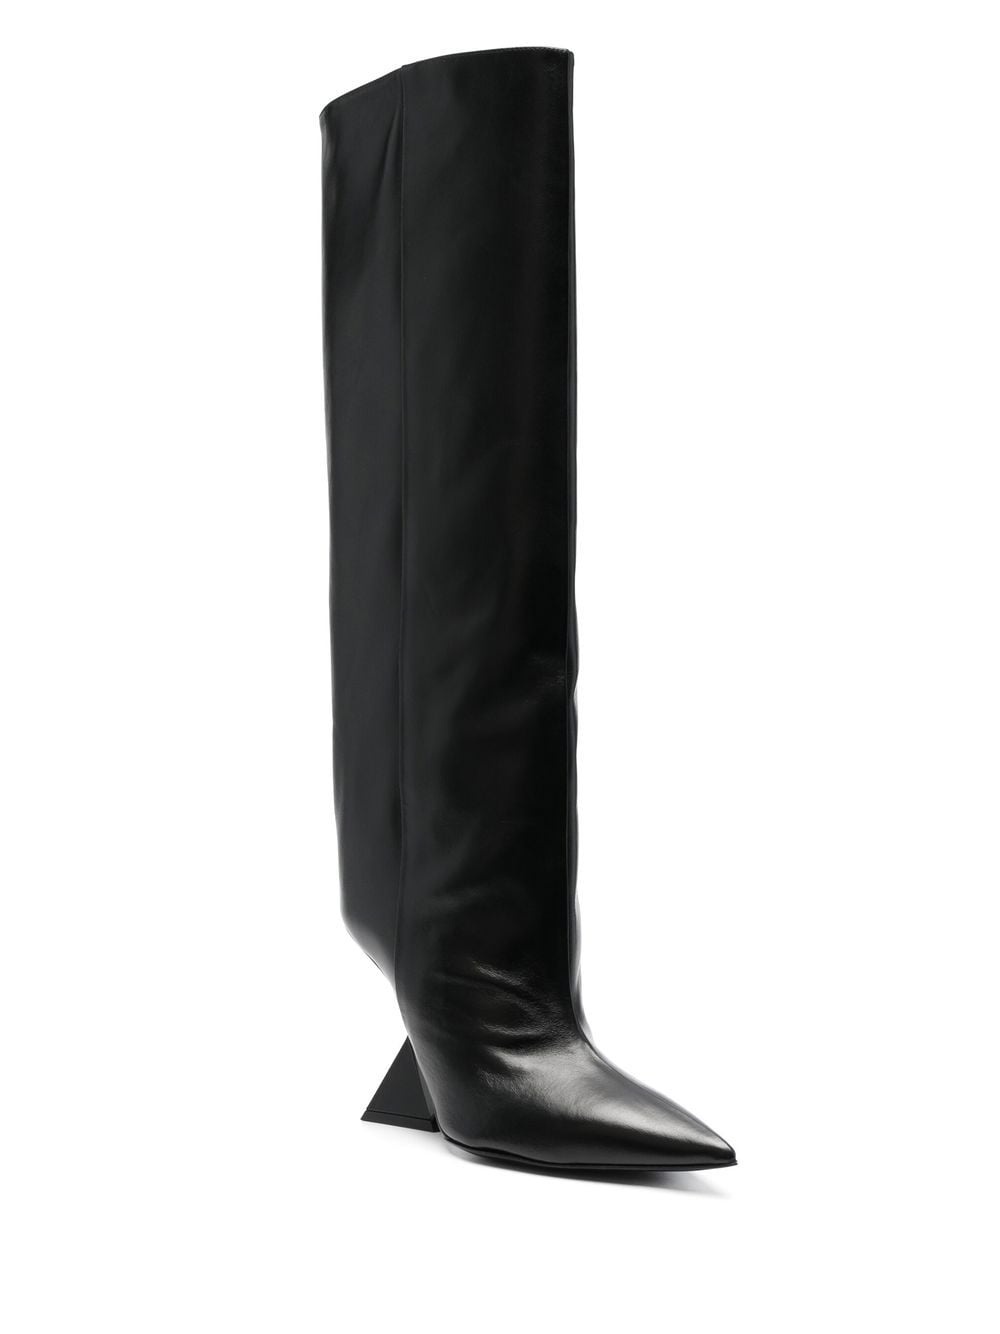 Cheope knee-high 105mm boots - 2